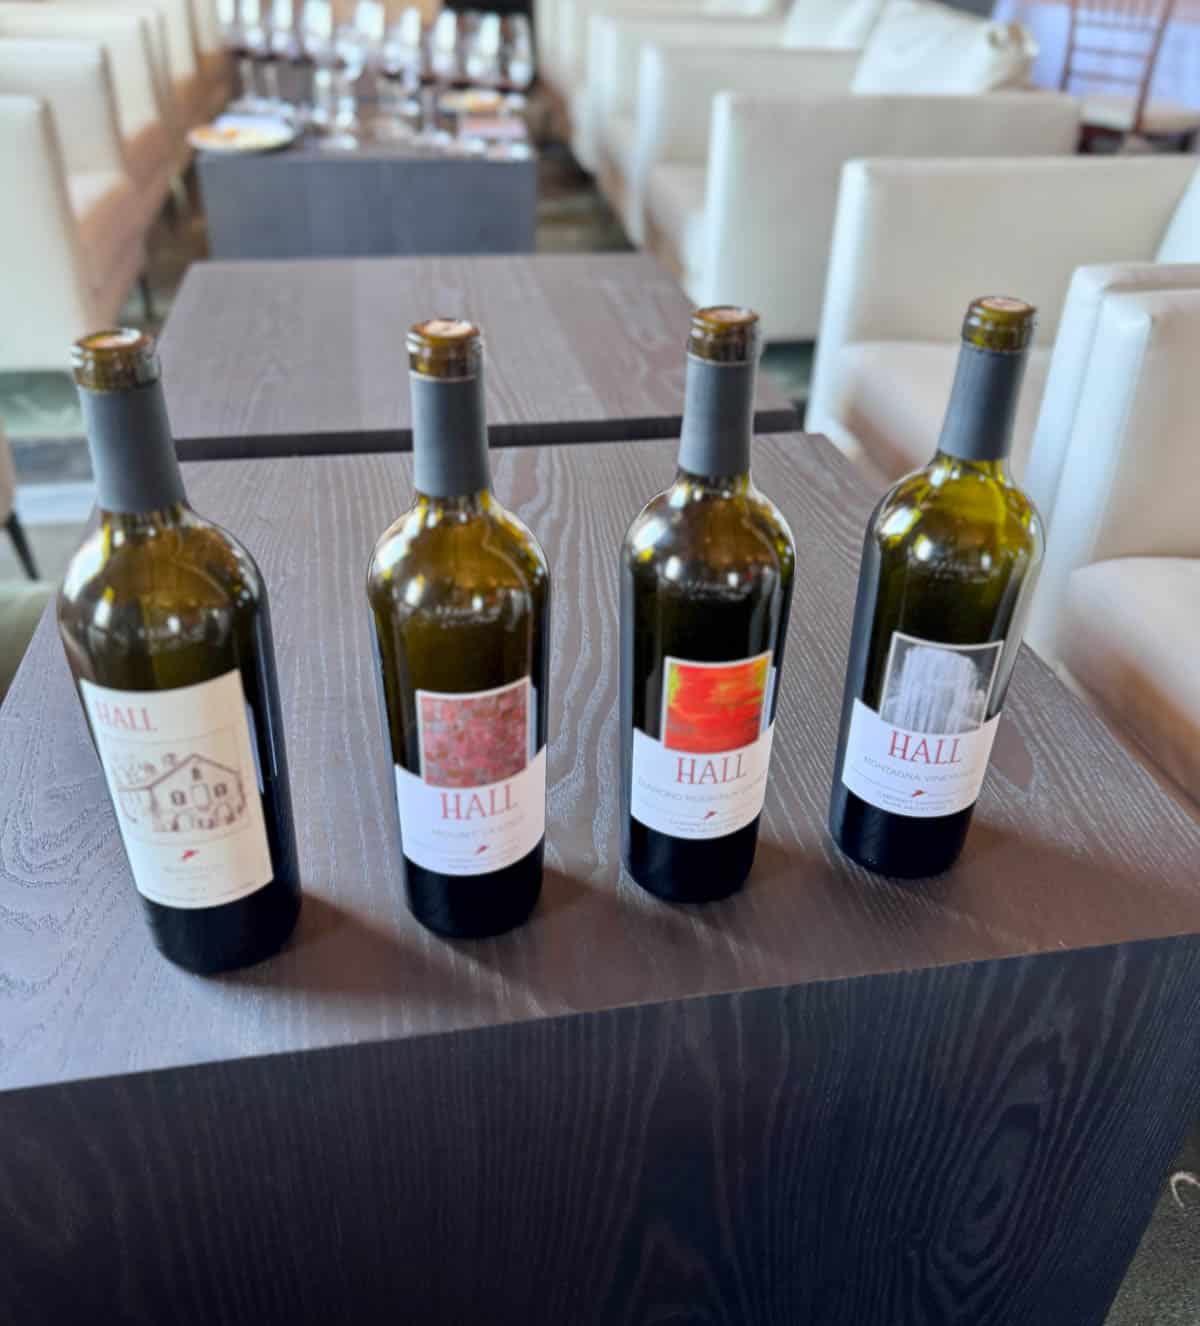 Four bottles of red wine on table between chairs.